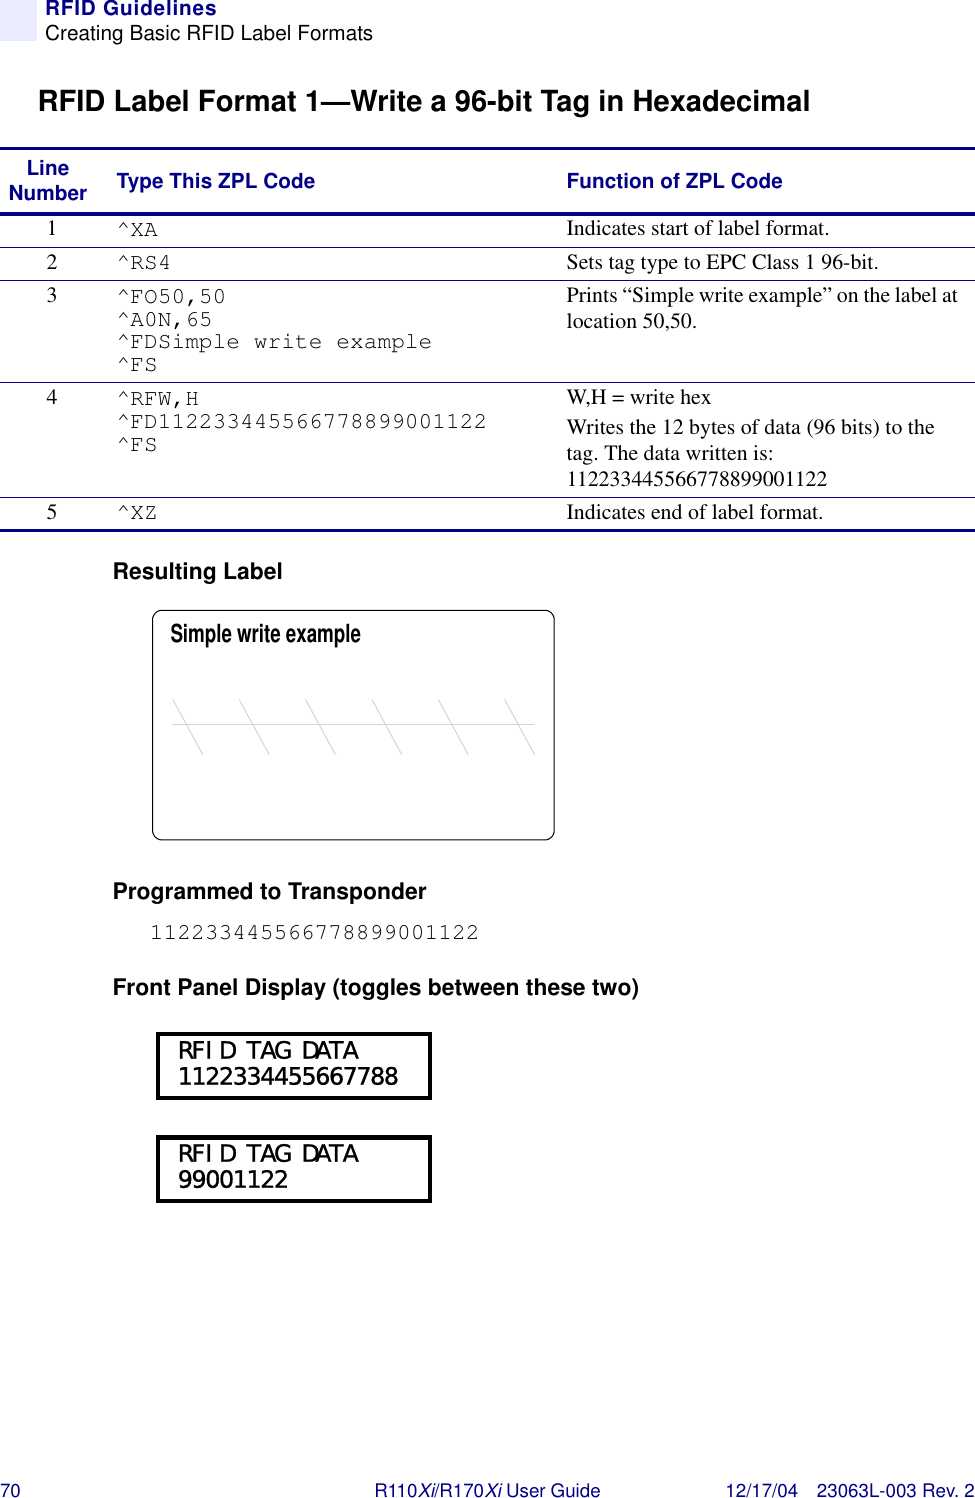 70 R110Xi/R170Xi User Guide 12/17/04 23063L-003 Rev. 2RFID GuidelinesCreating Basic RFID Label FormatsRFID Label Format 1—Write a 96-bit Tag in HexadecimalResulting LabelProgrammed to Transponder112233445566778899001122Front Panel Display (toggles between these two)Line Number Type This ZPL Code Function of ZPL Code1^XA Indicates start of label format.2^RS4 Sets tag type to EPC Class 1 96-bit.3^FO50,50^A0N,65^FDSimple write example^FSPrints “Simple write example” on the label at location 50,50.4^RFW,H^FD112233445566778899001122^FSW,H = write hexWrites the 12 bytes of data (96 bits) to the tag. The data written is: 1122334455667788990011225^XZ Indicates end of label format.Simple write example RFID TAG DATA 1122334455667788 RFID TAG DATA 99001122